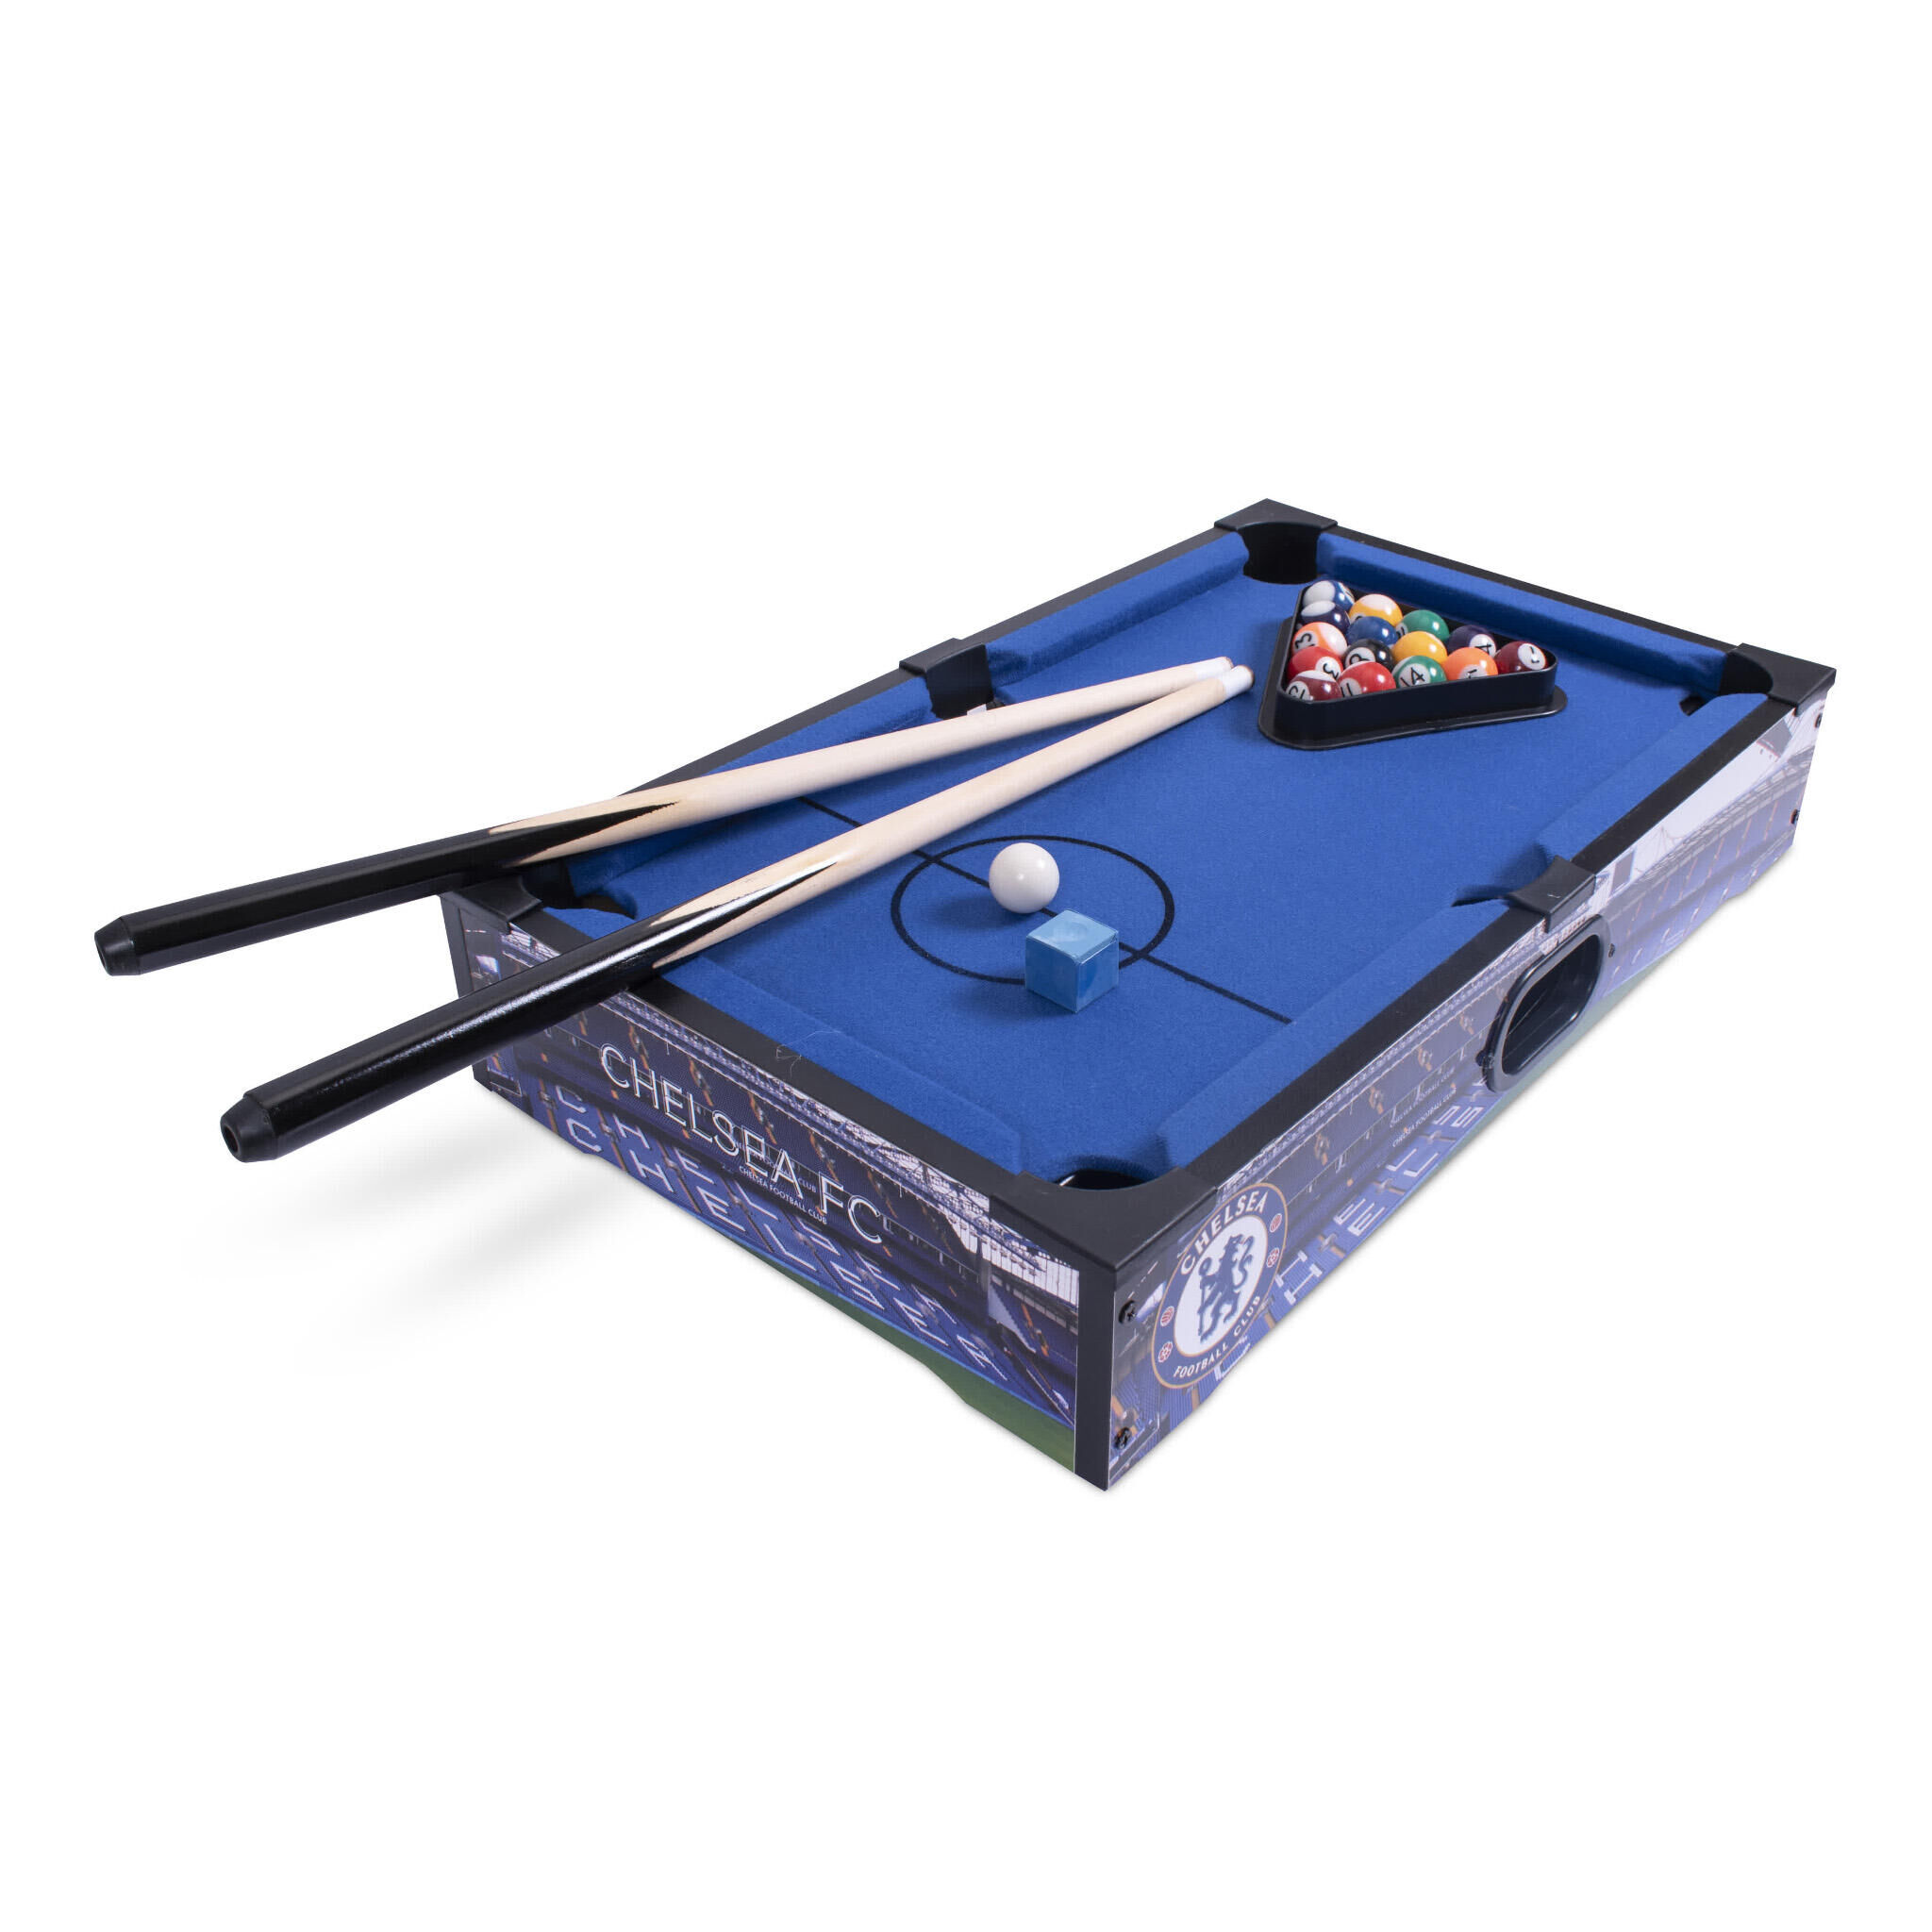 HY-PRO Chelsea 20 inch Pool Table